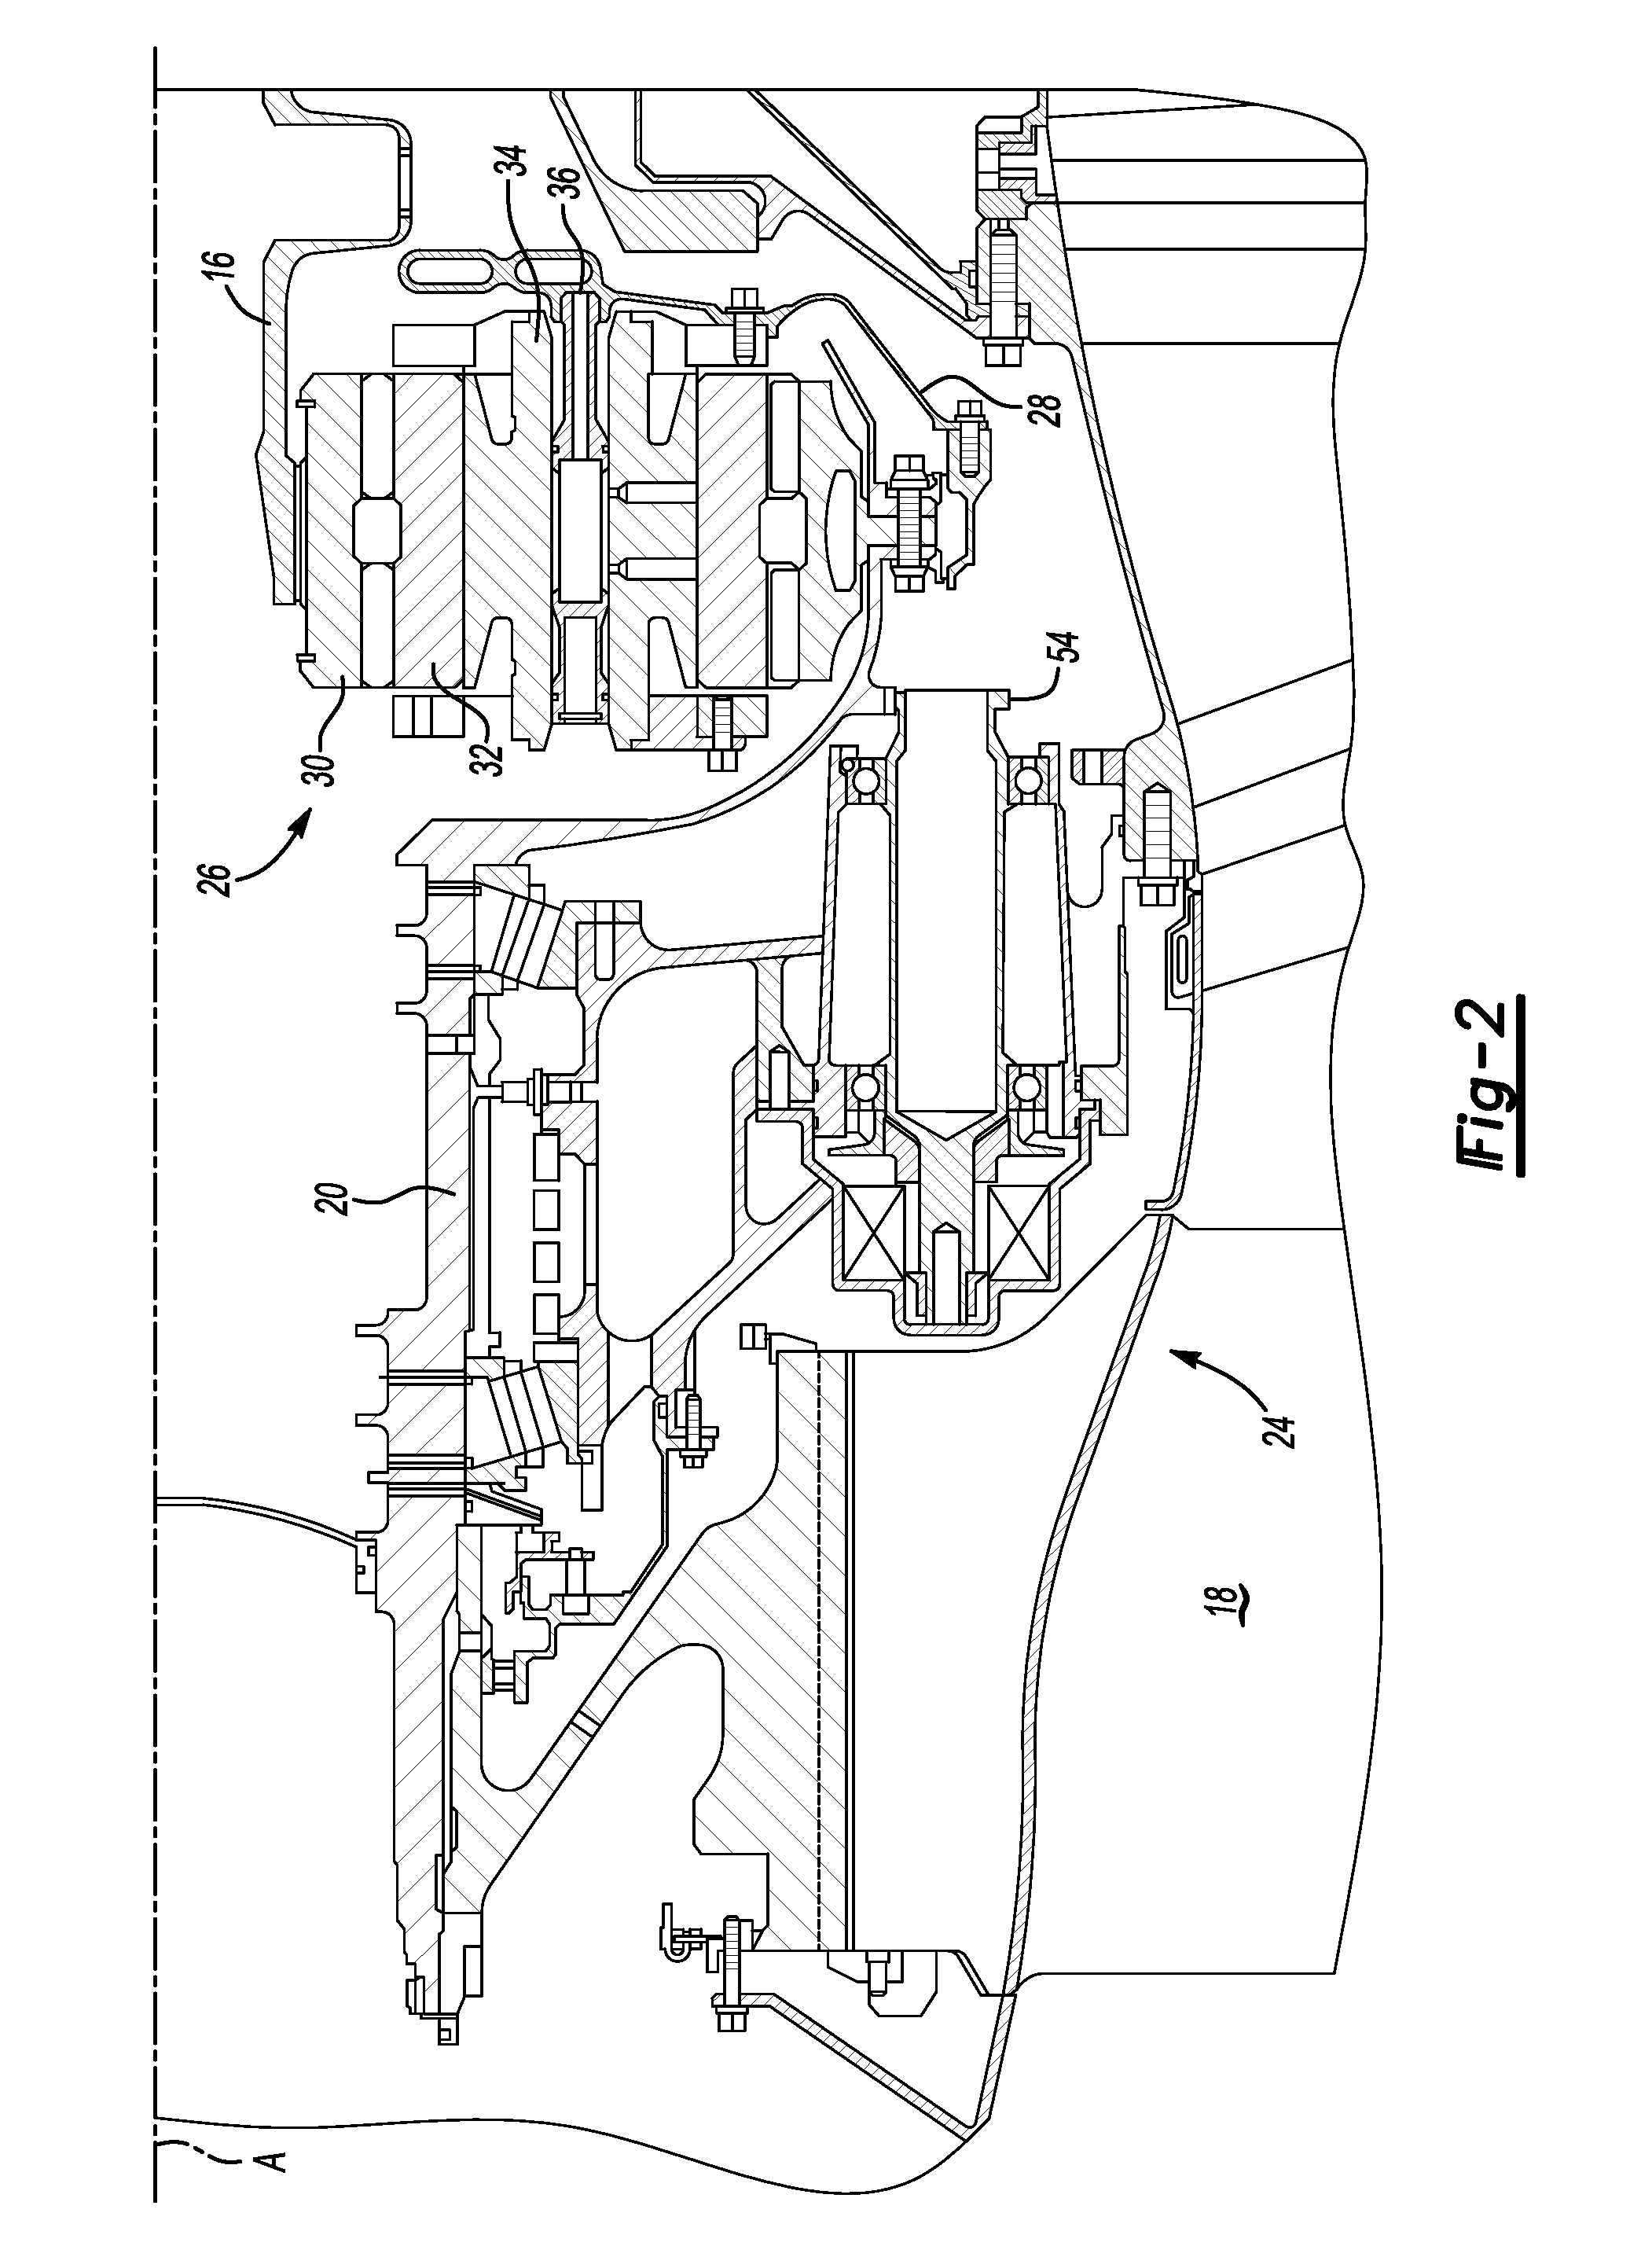 Rotor brake and windmilling lubrication system for geared turbofan engine